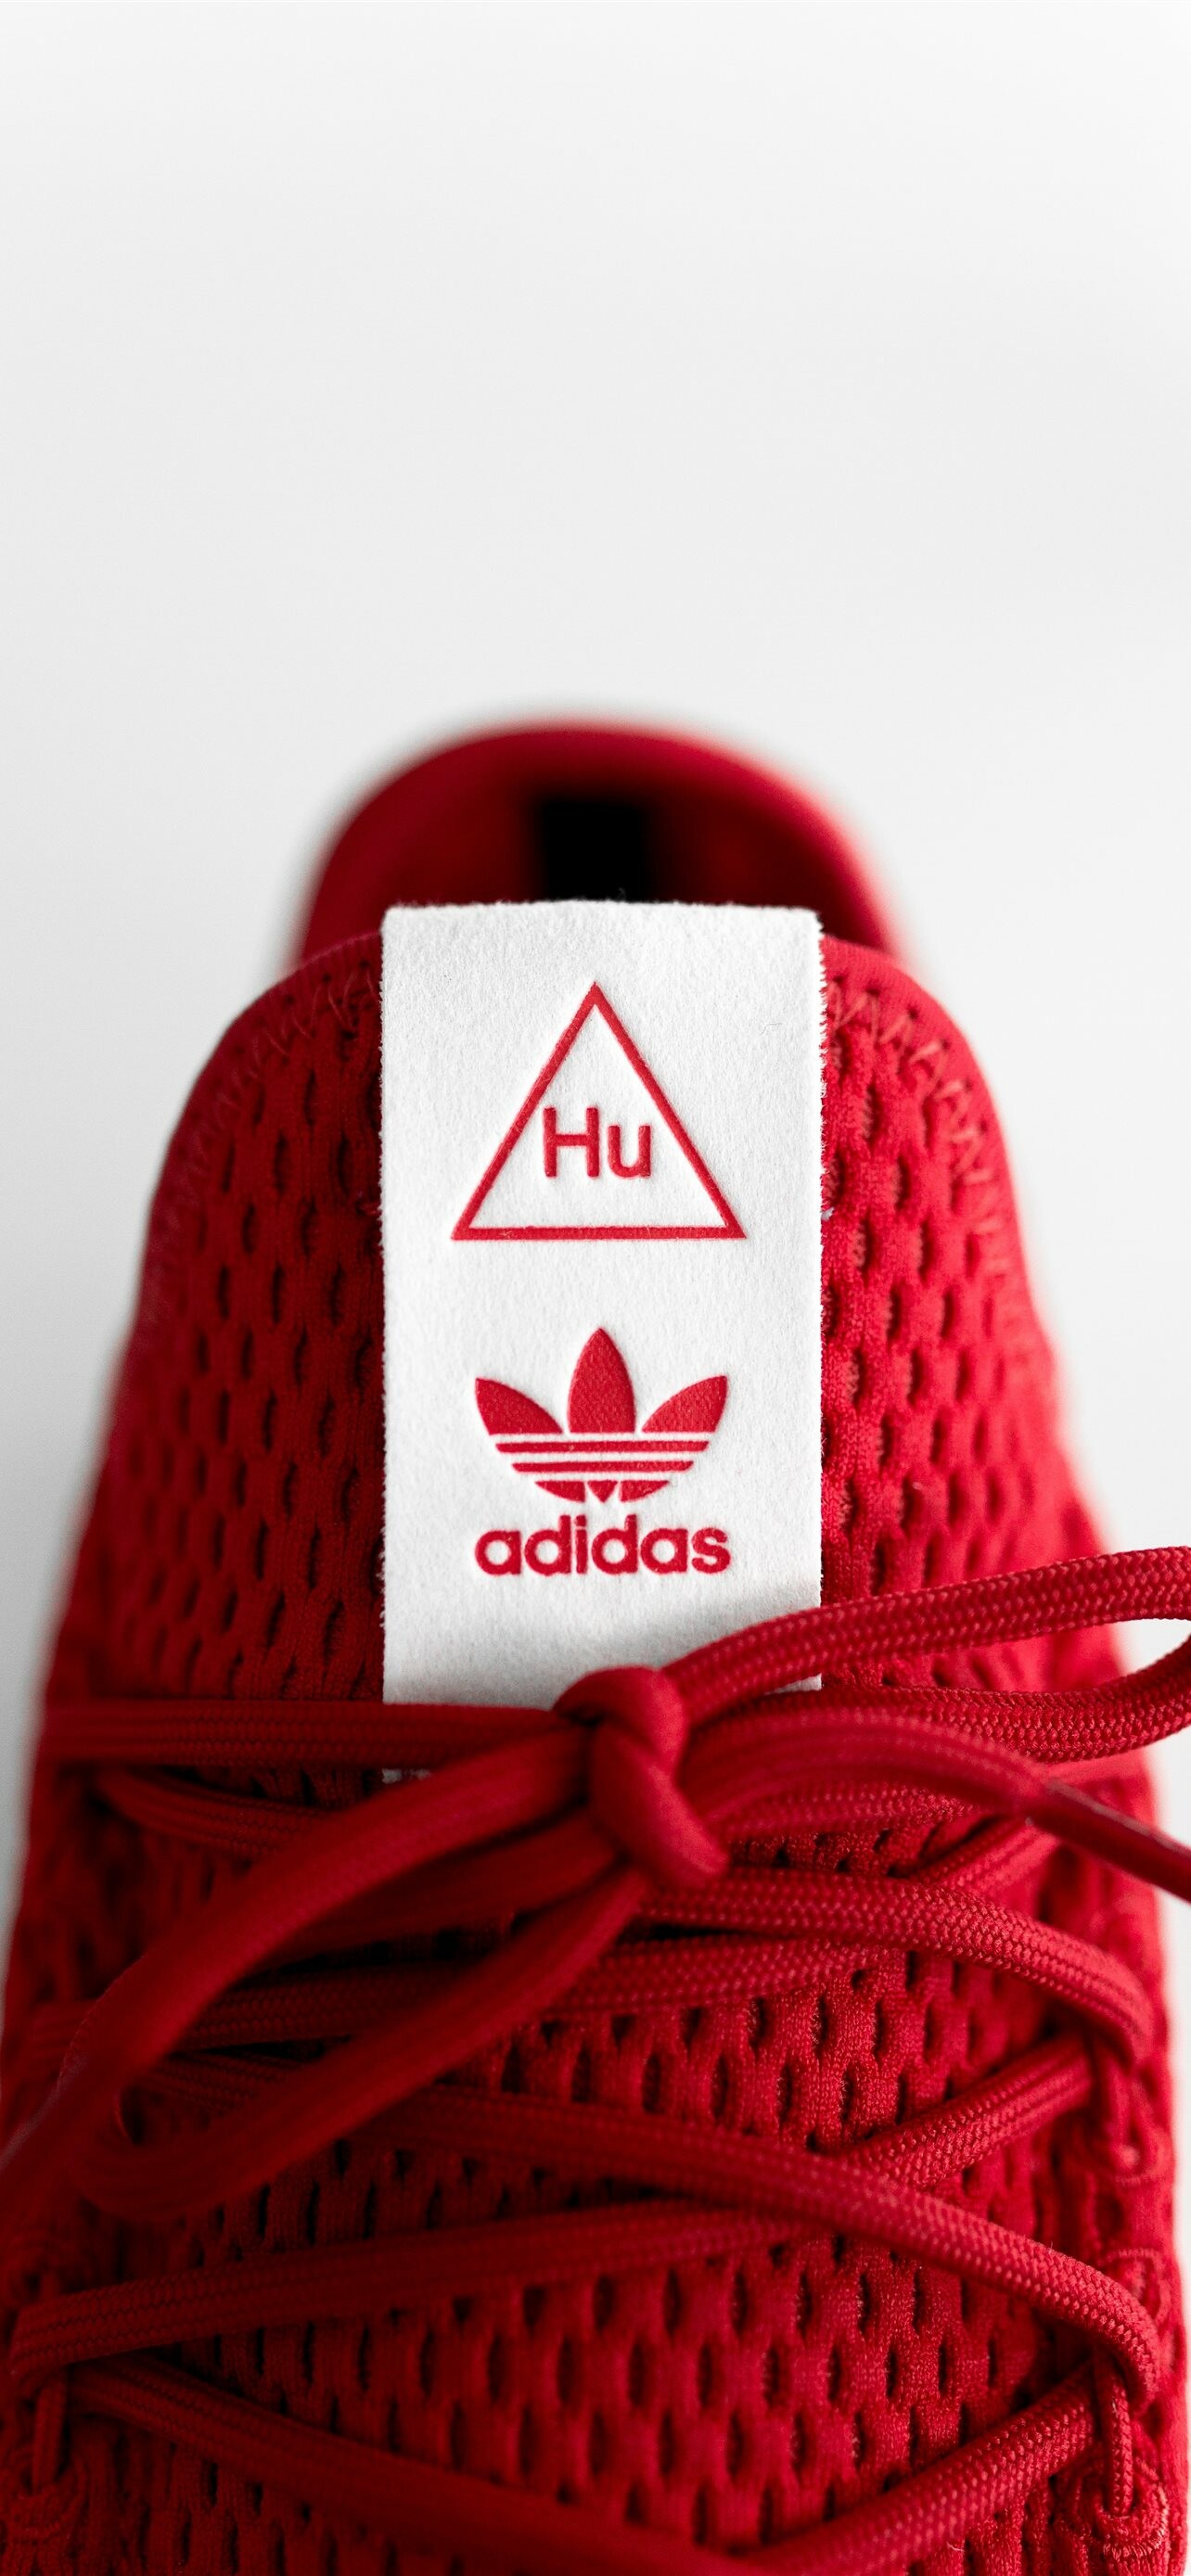 Latest Adidas iPhone wallpapers, Iconic brand logo, Stylish designs, High-quality graphics, 1290x2780 HD Phone